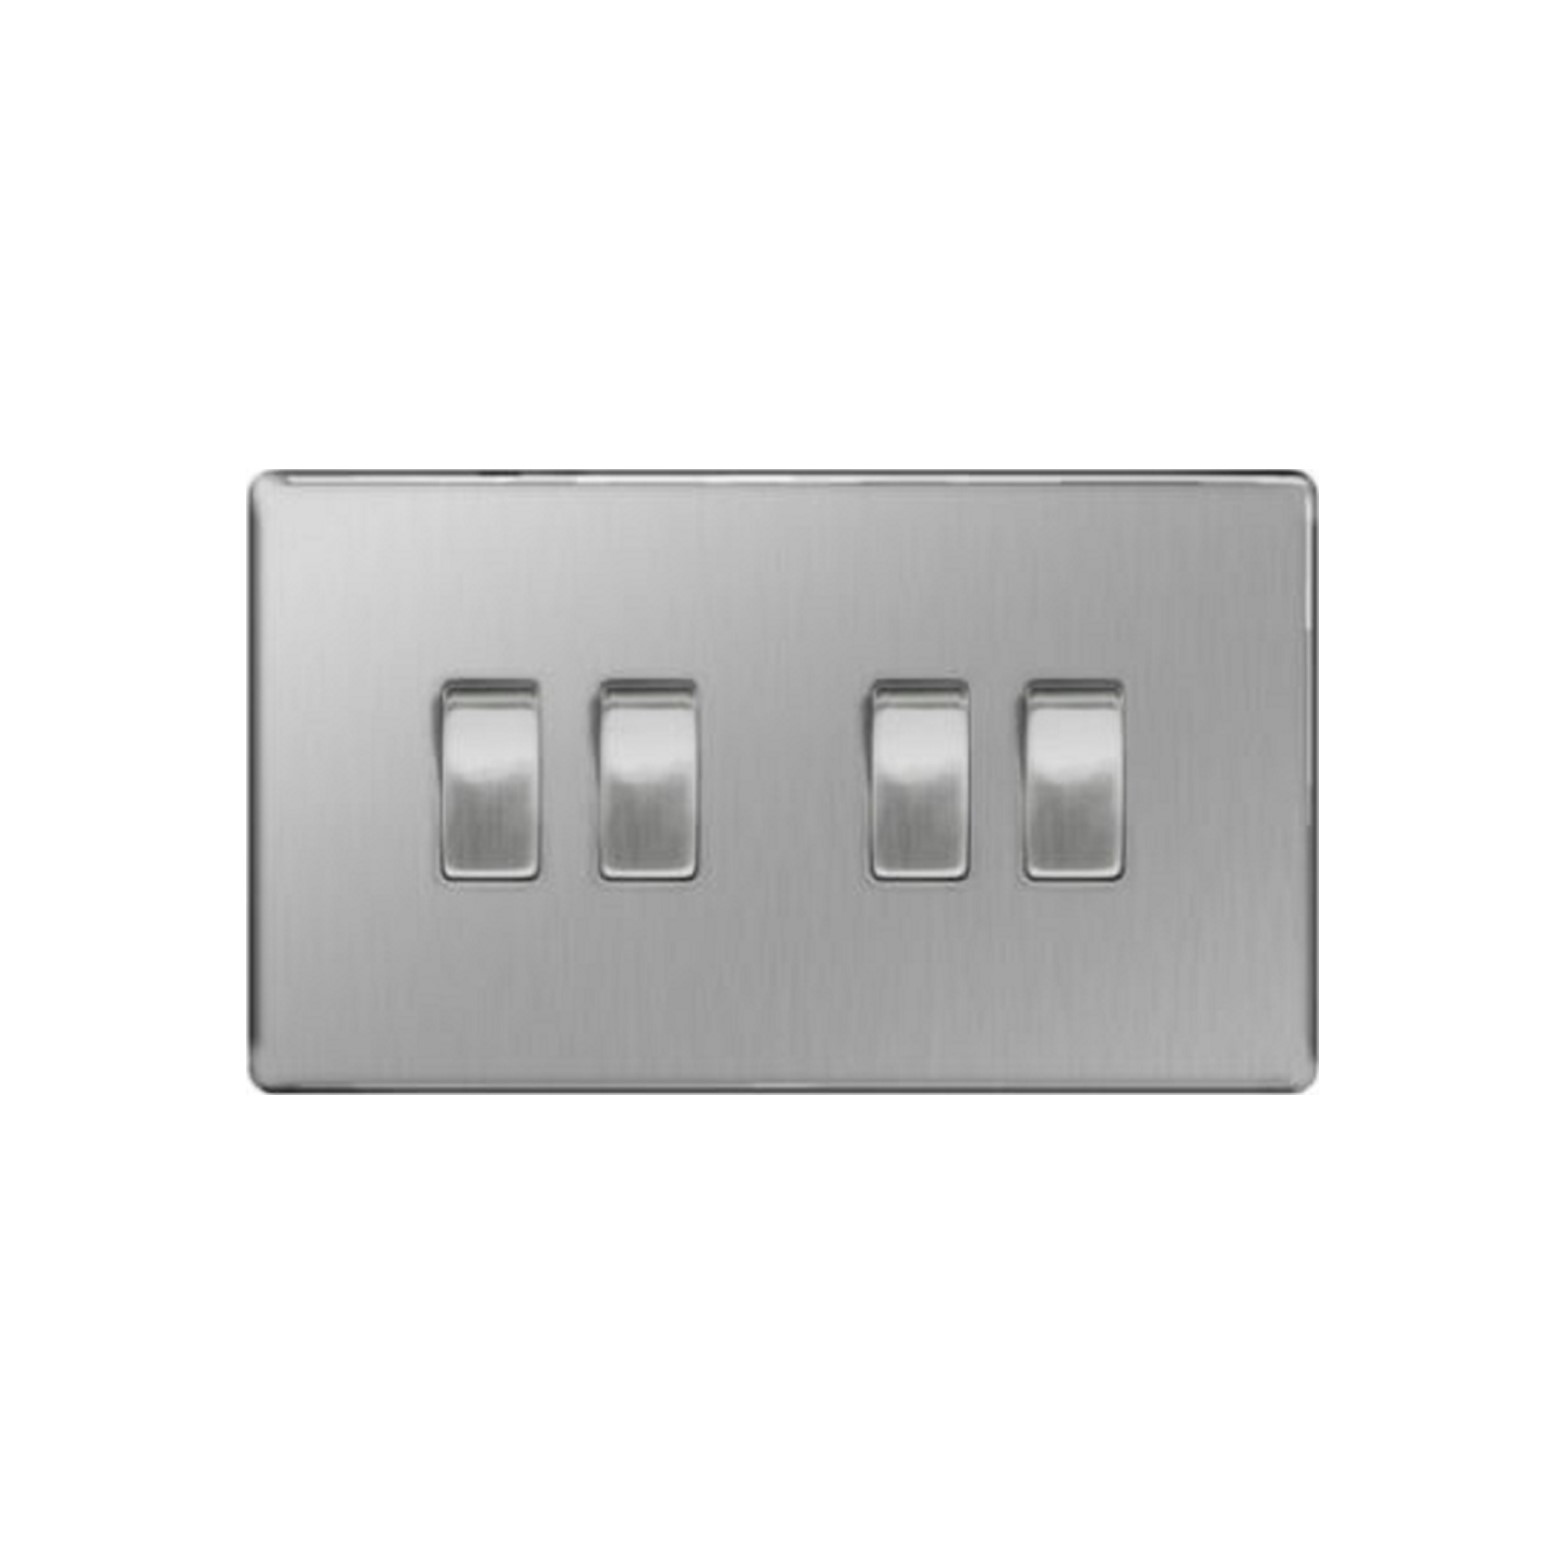 Flatplate Brushed Steel 4-Gang 2Way 10AX Switch, four screwless clip-on front plate curved corners (FBS44)